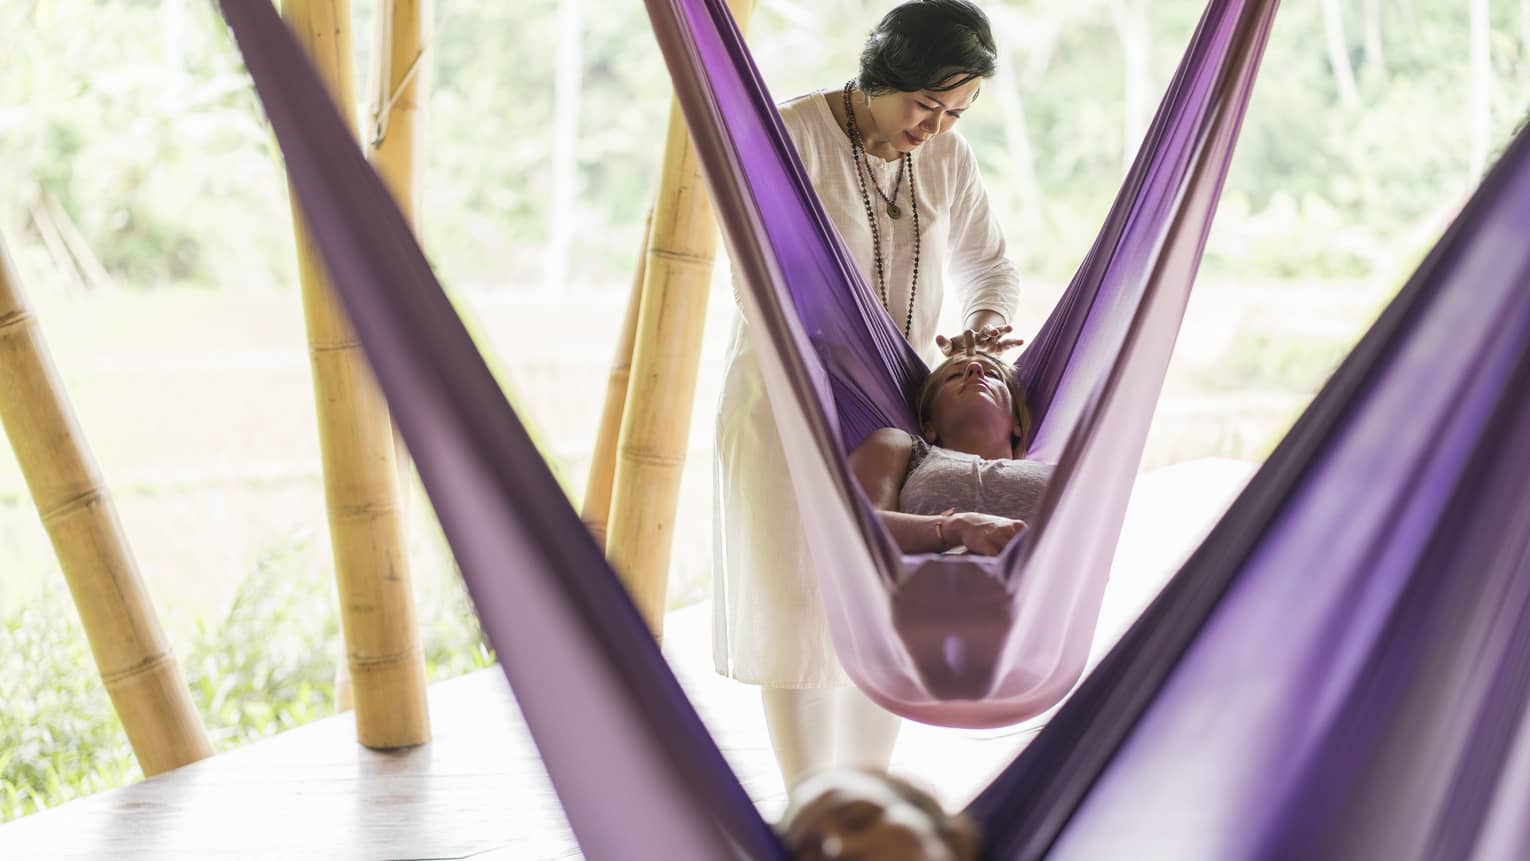 A Four Seasons yoga instructor massages the forehead of a guest during a sacred nap 